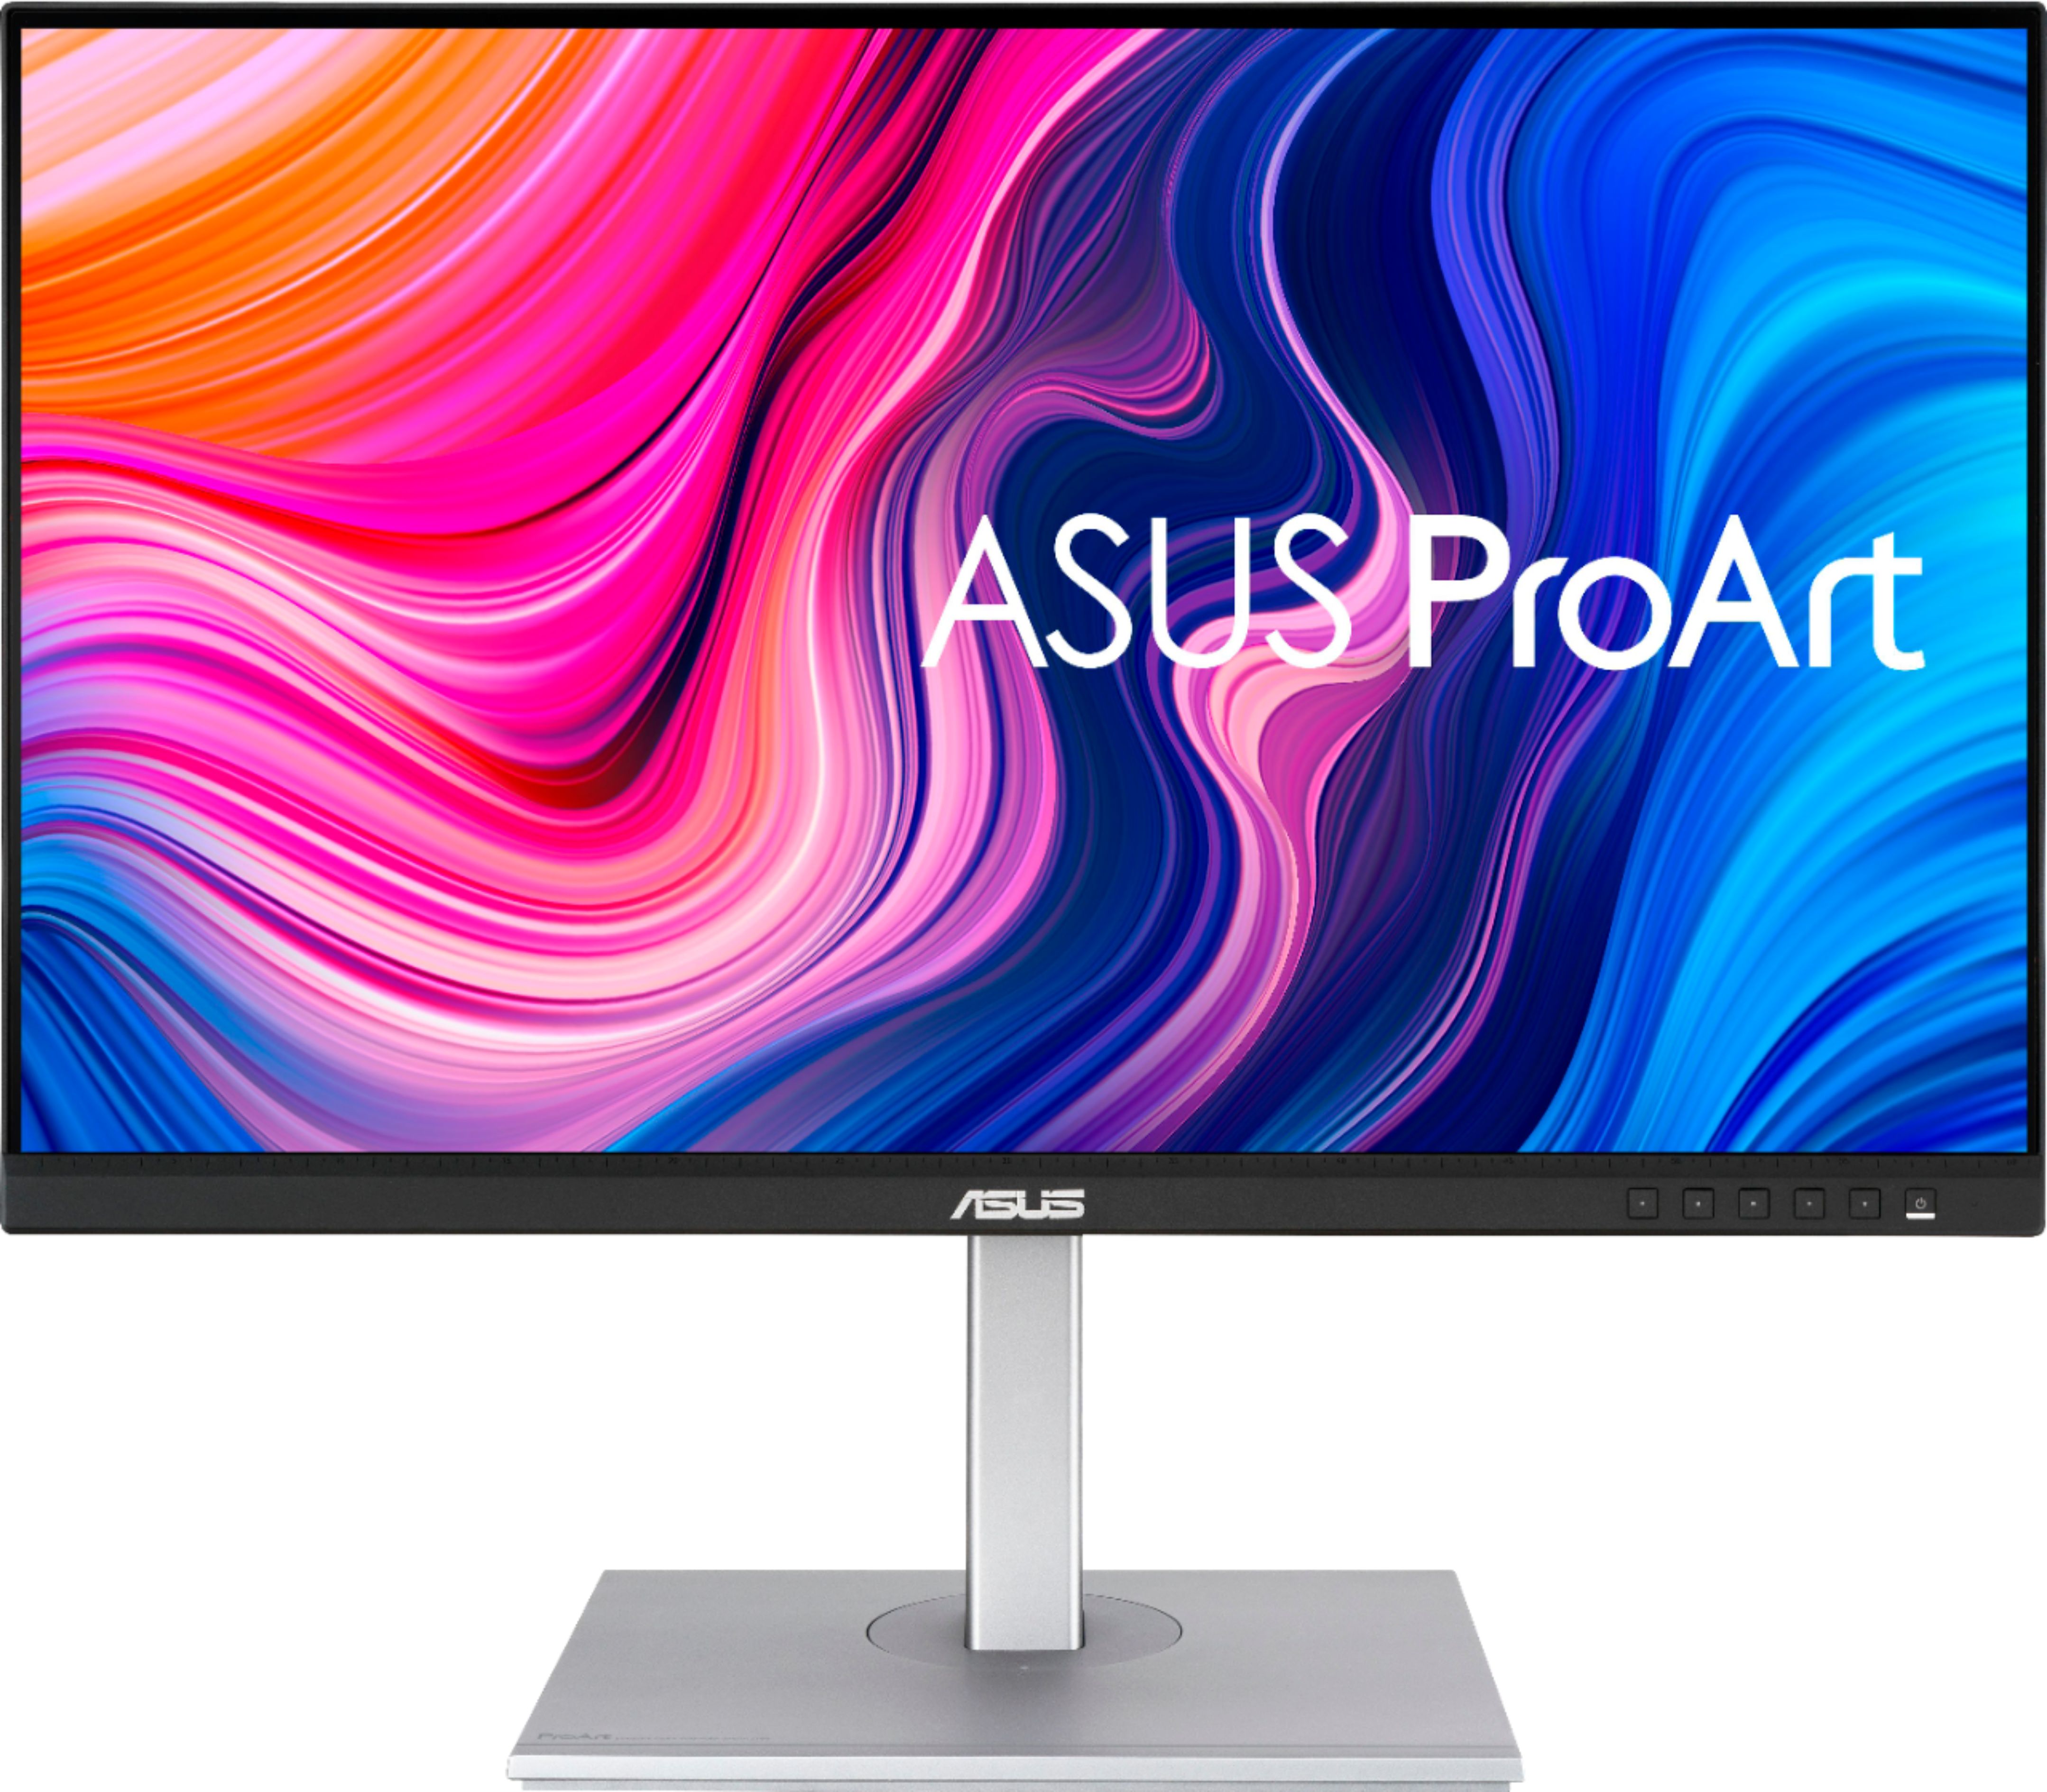 ASUS ProArt 27" IPS 4K Professional Monitor with Height Adjustable (DisplayPort,HDMI) PA279CV - Best Buy